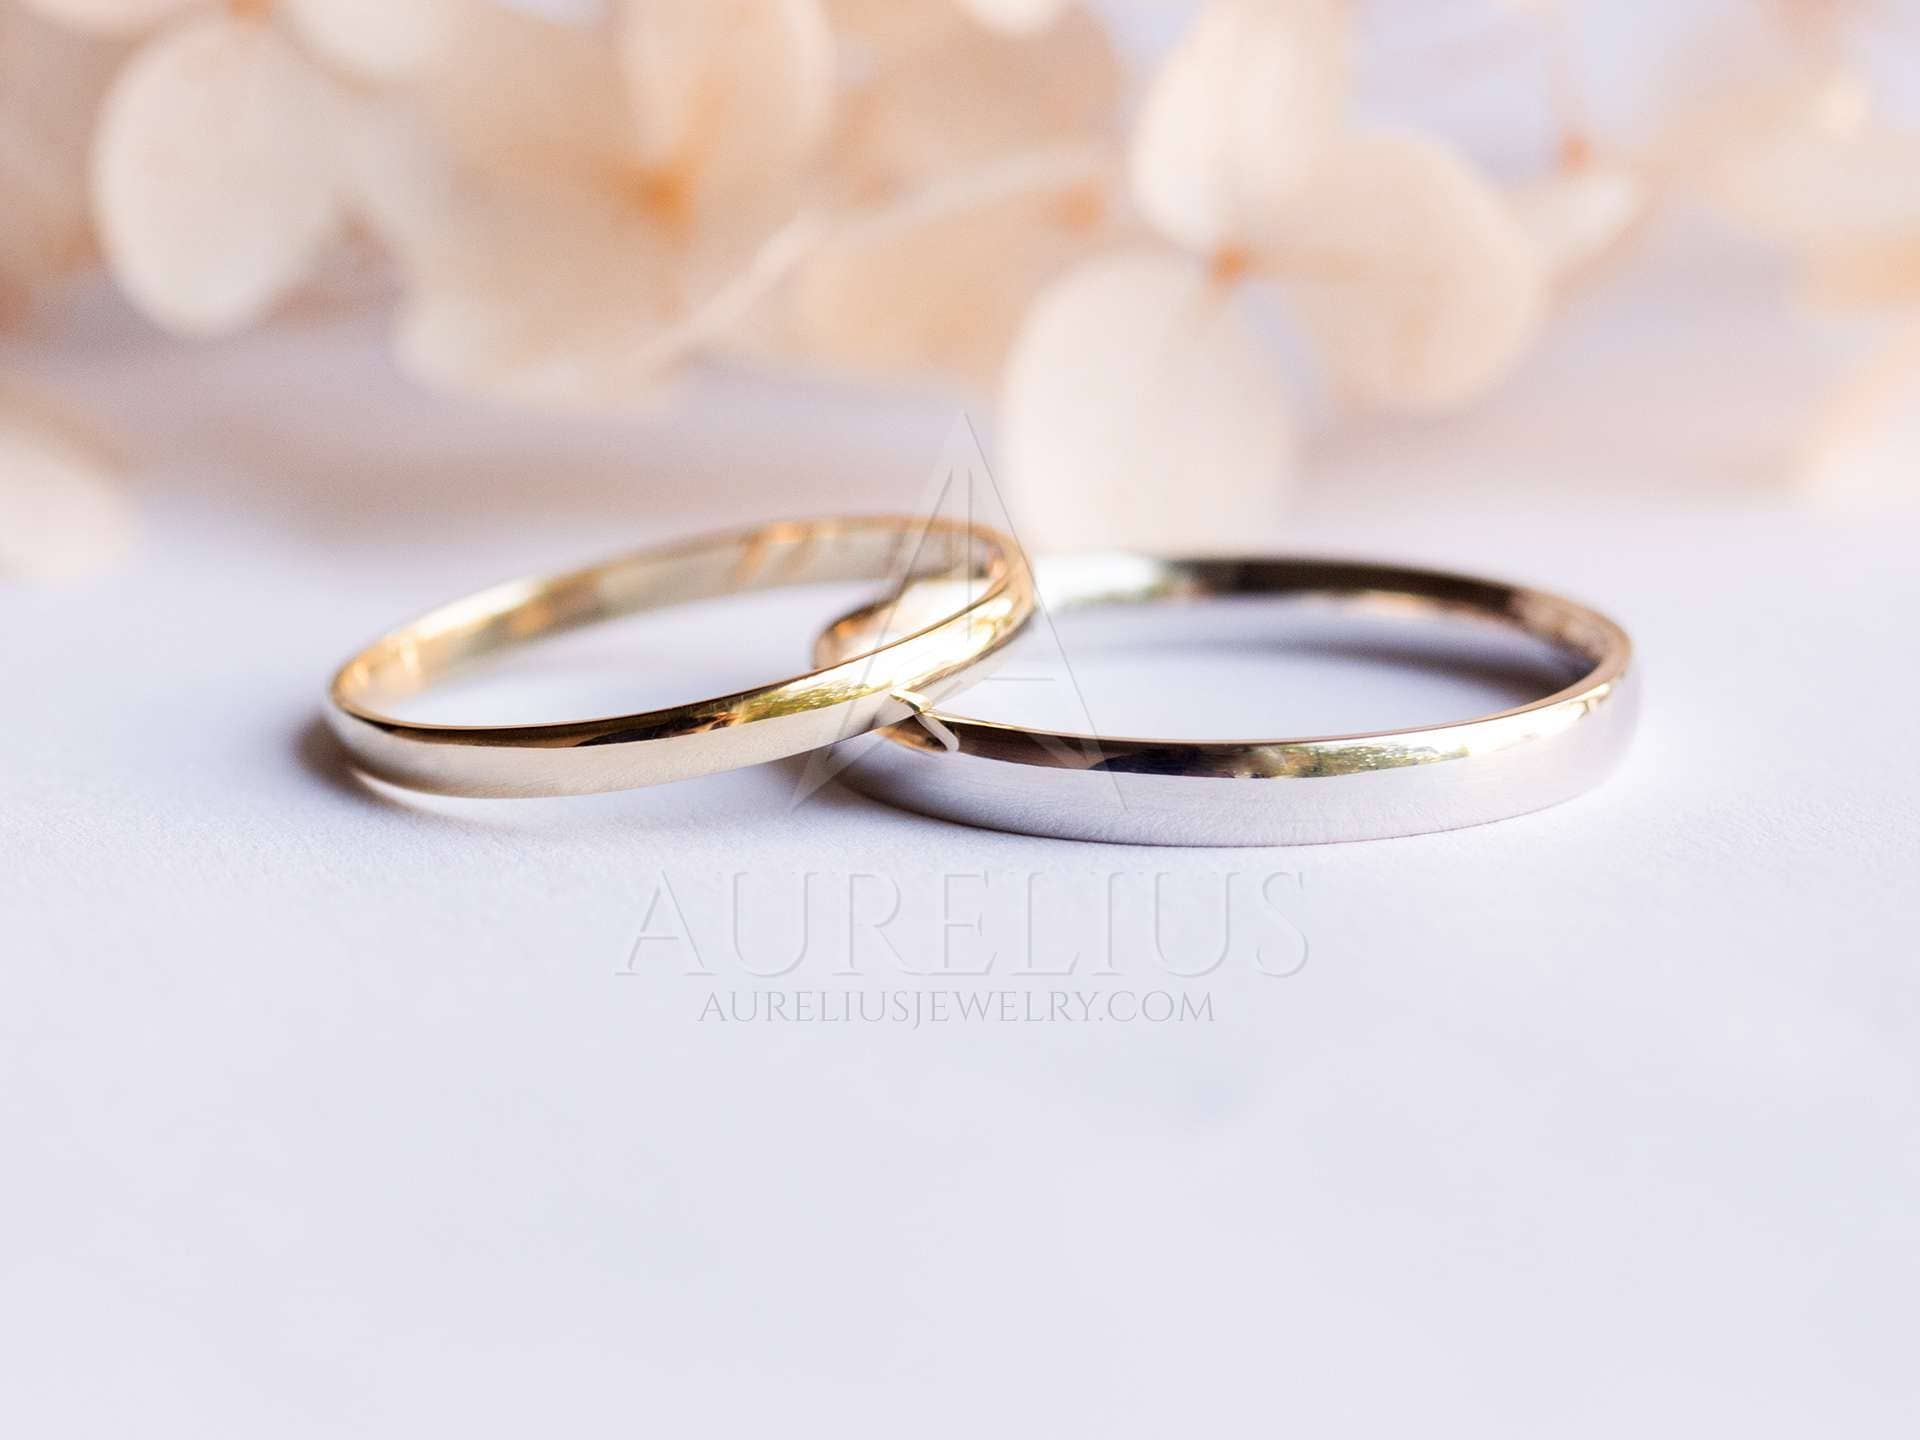 Rings - 14k Gold Color Ring Men Wedding Engagement Jewelry Couple